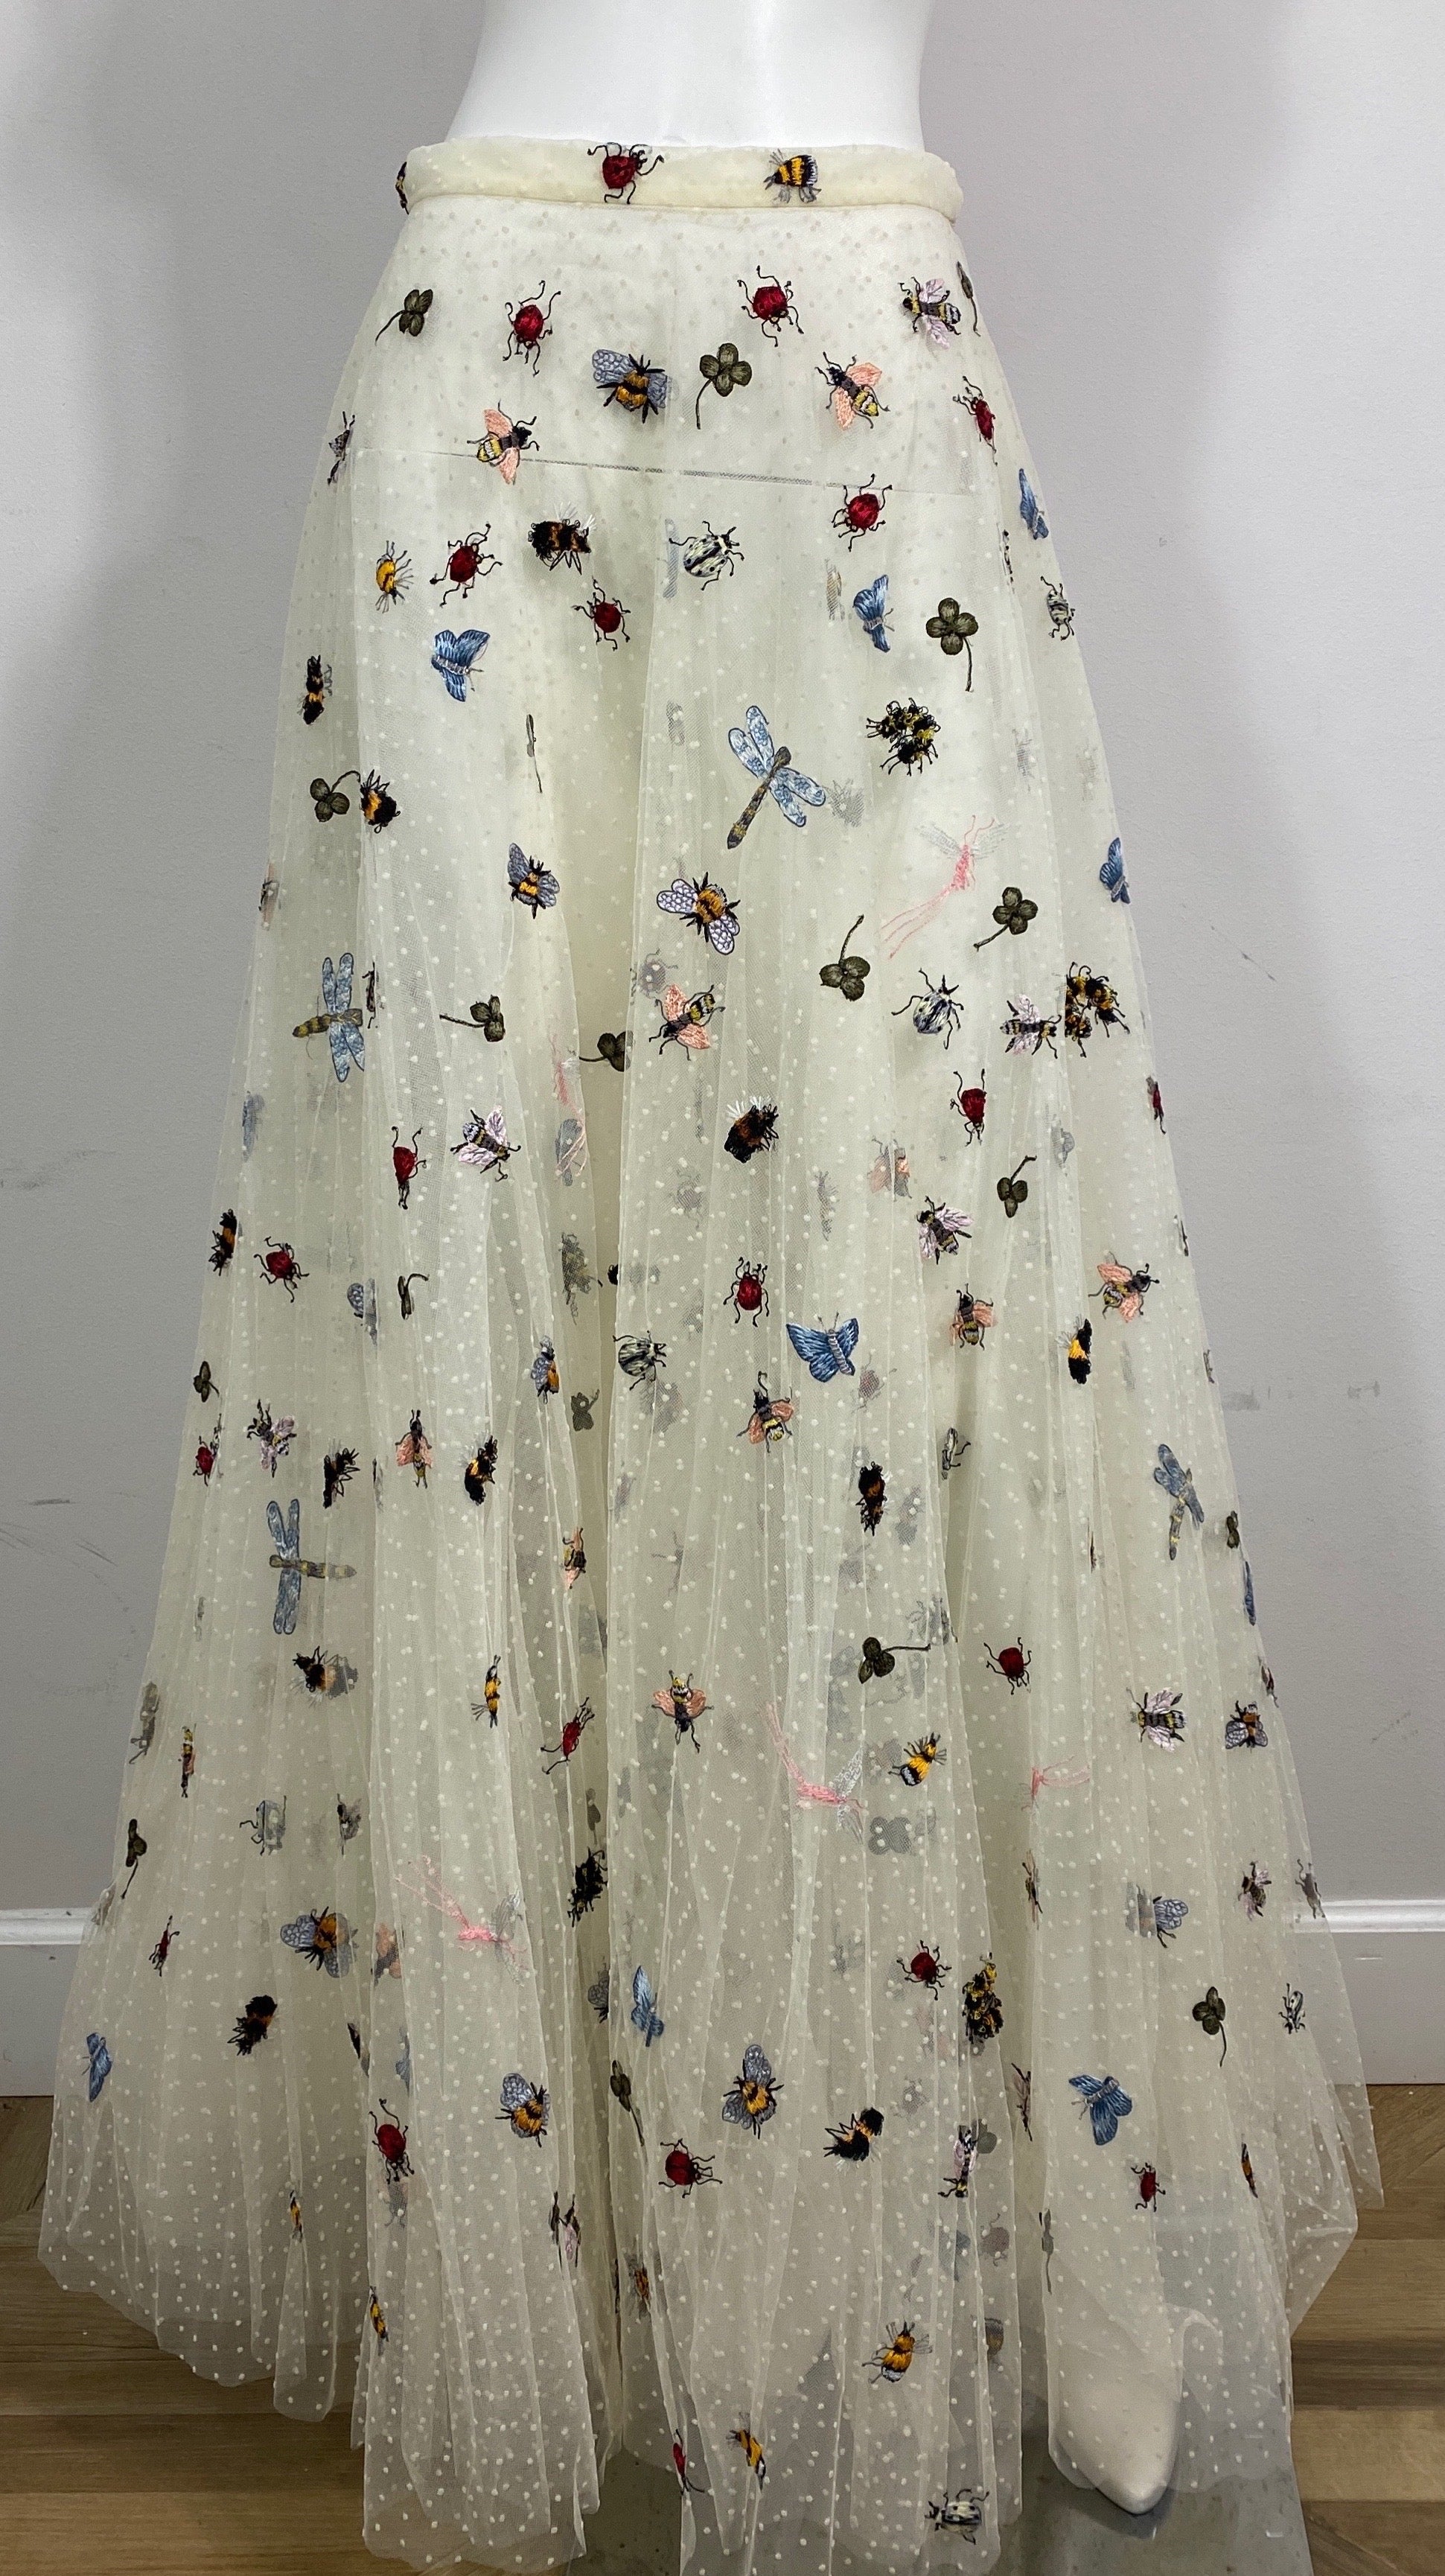 Christian Dior S/S 2017 Runway “Beautiful Bugs” Ivory Sheer and Tulle Maxi Skirt-Size 6  This never used runway tulle embroidered maxi skirt was look 54 of the Spring/Summer 2017 Christian Dior Paris Fashion Week Show. This also was Dior - Maria